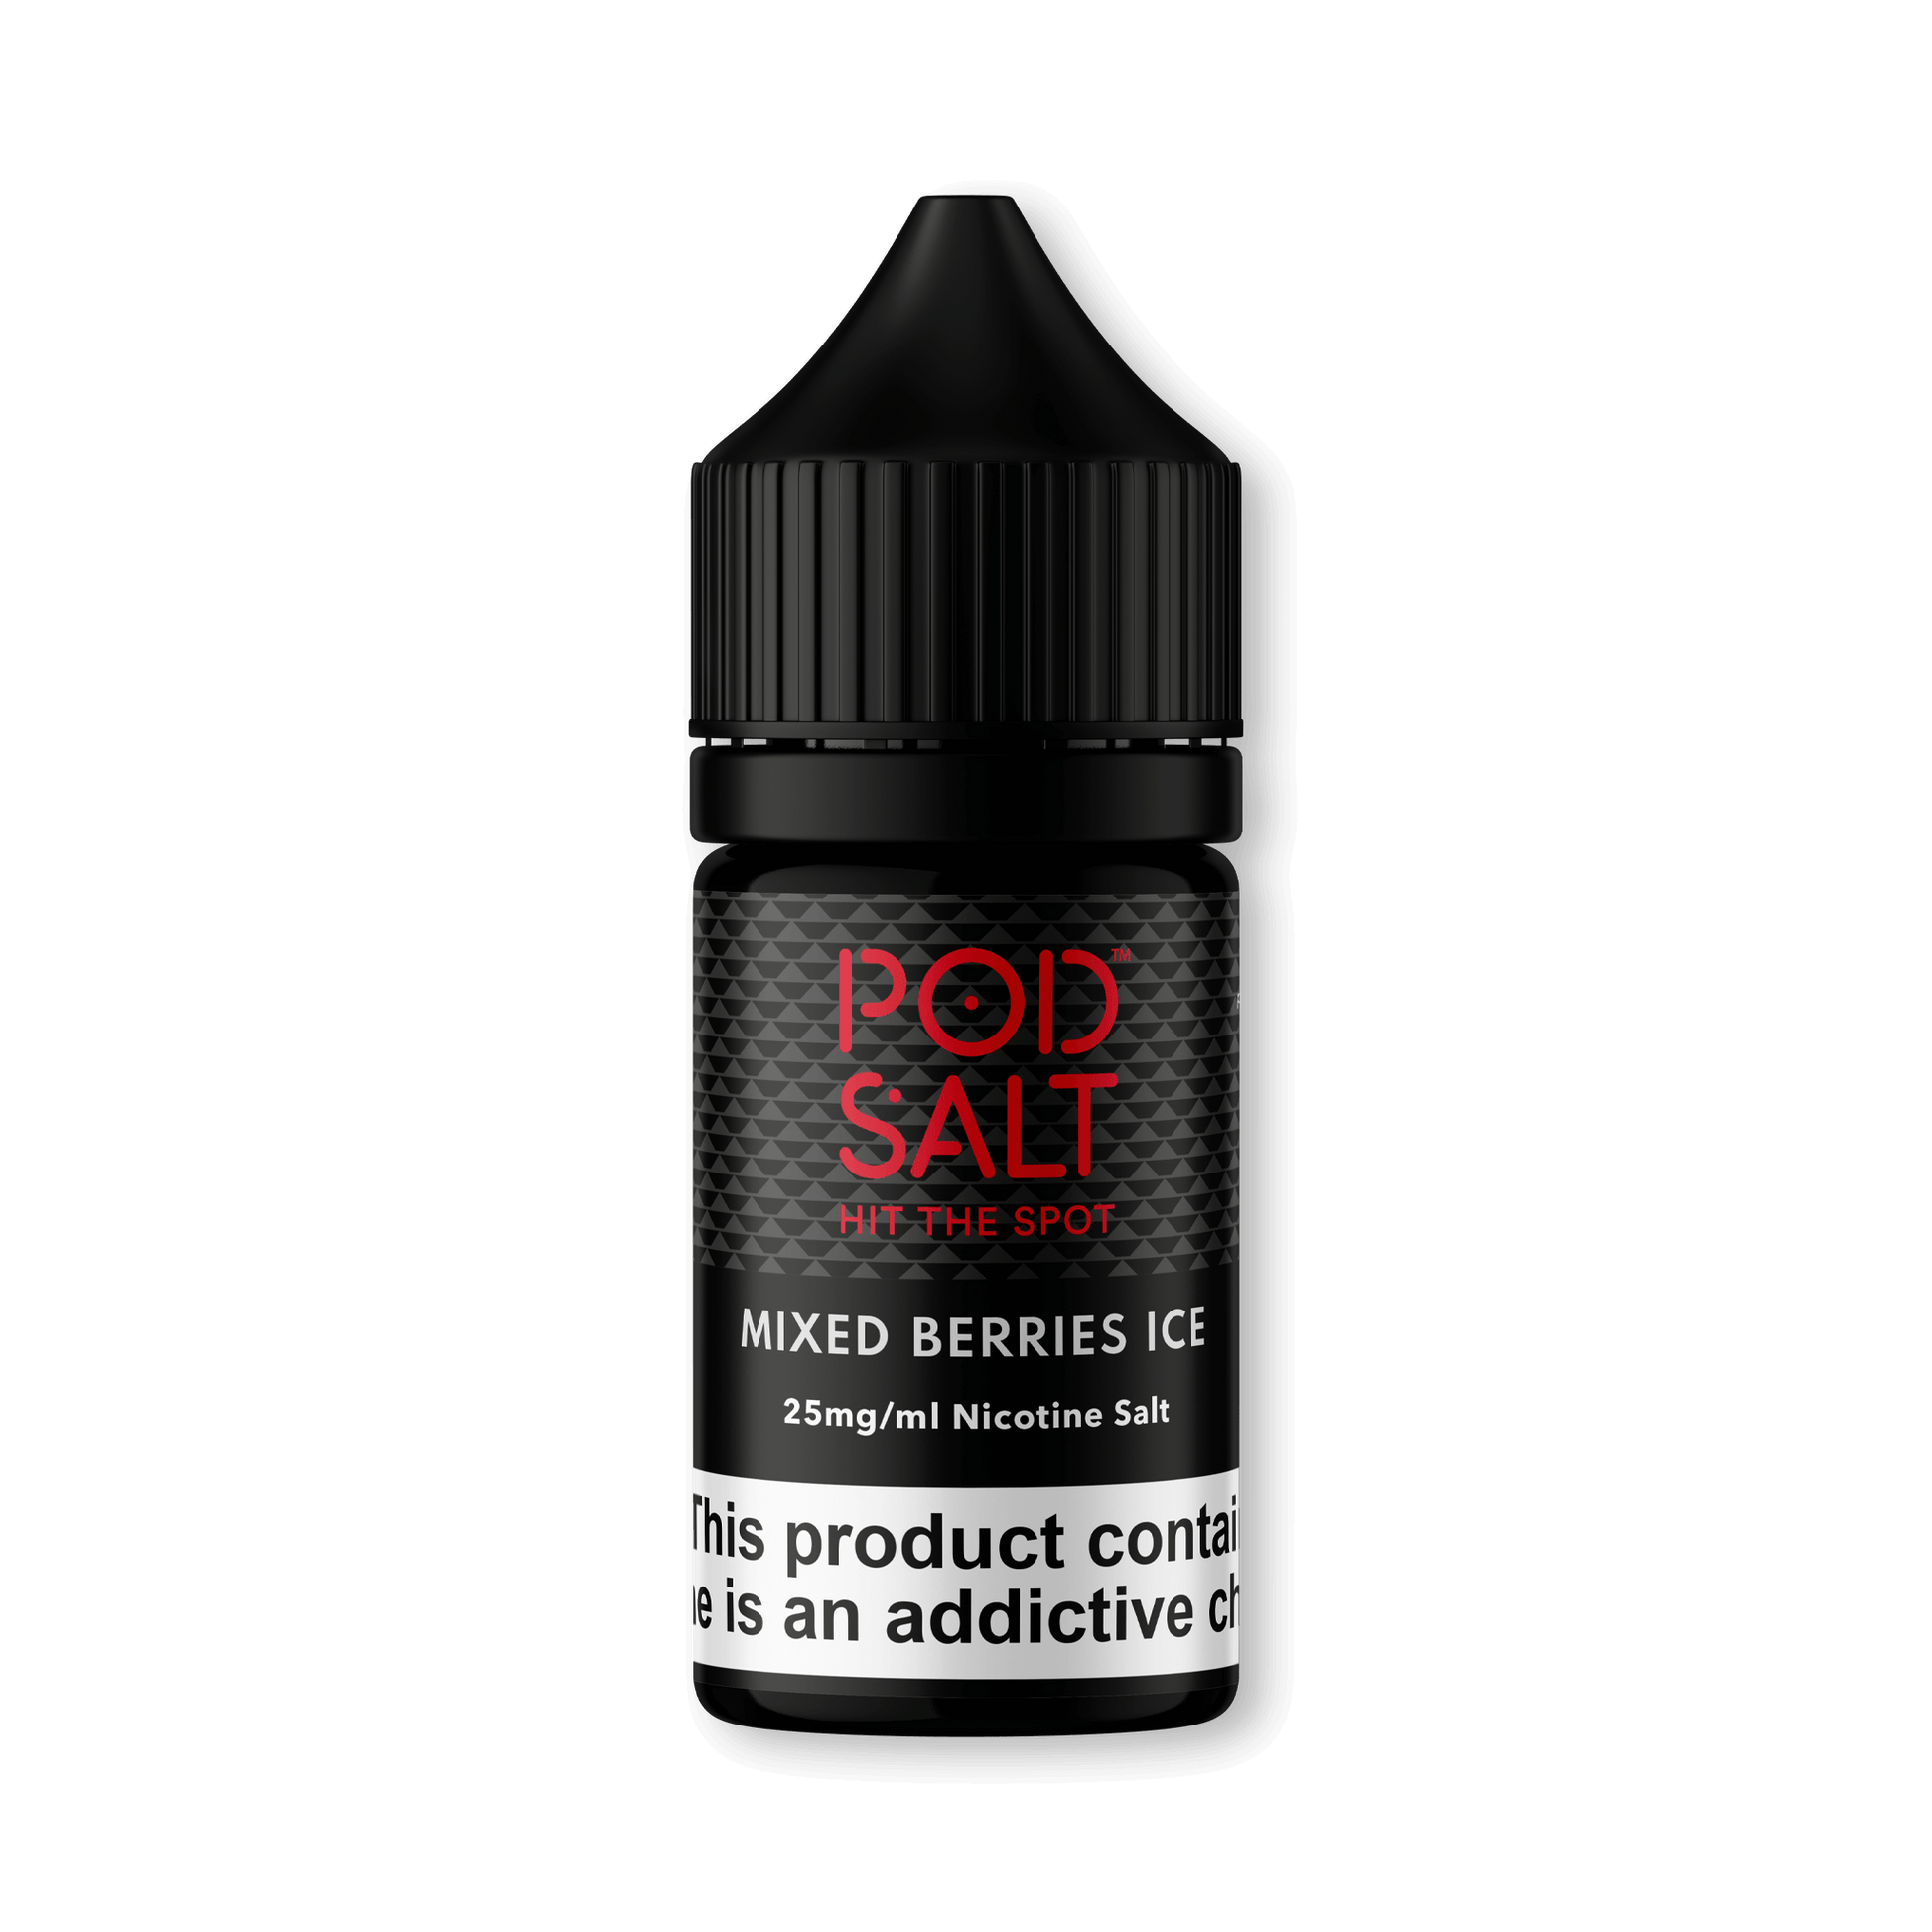 forest berries strawberry raspberry blueberry fruity goodness expertly blended Nicotine Salt formula ICONA VAPE exclusive Shop now Flavour profile: Berries, Ice 30ml bottle size 50VG/50PG ratio Made in the UK TPD Compliant